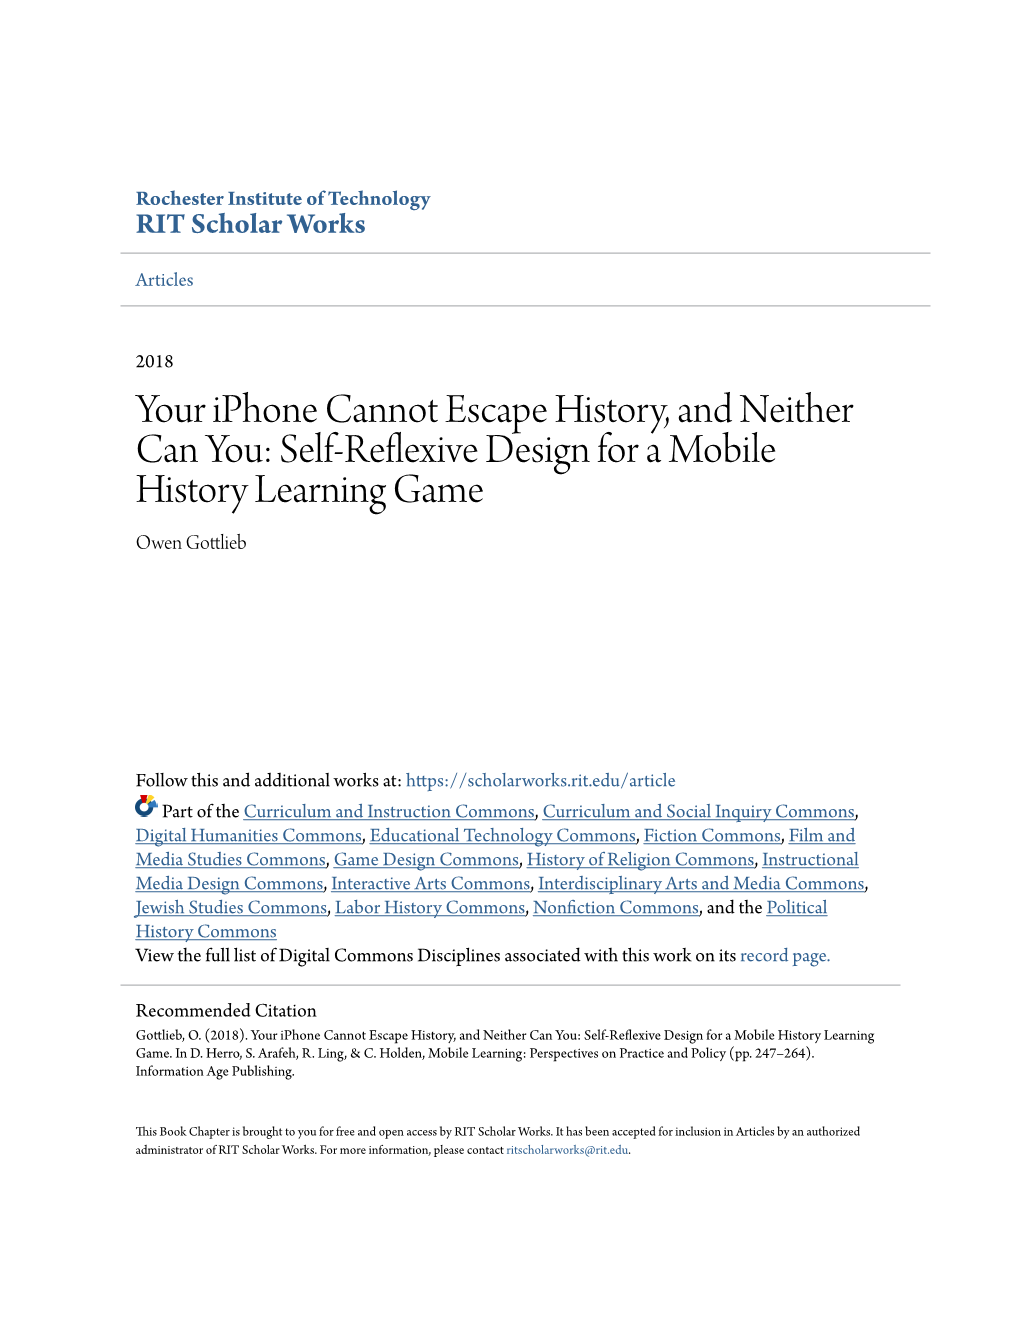 Your Iphone Cannot Escape History, and Neither Can You: Self-Reflexive Design for a Mobile History Learning Game Owen Gottlieb